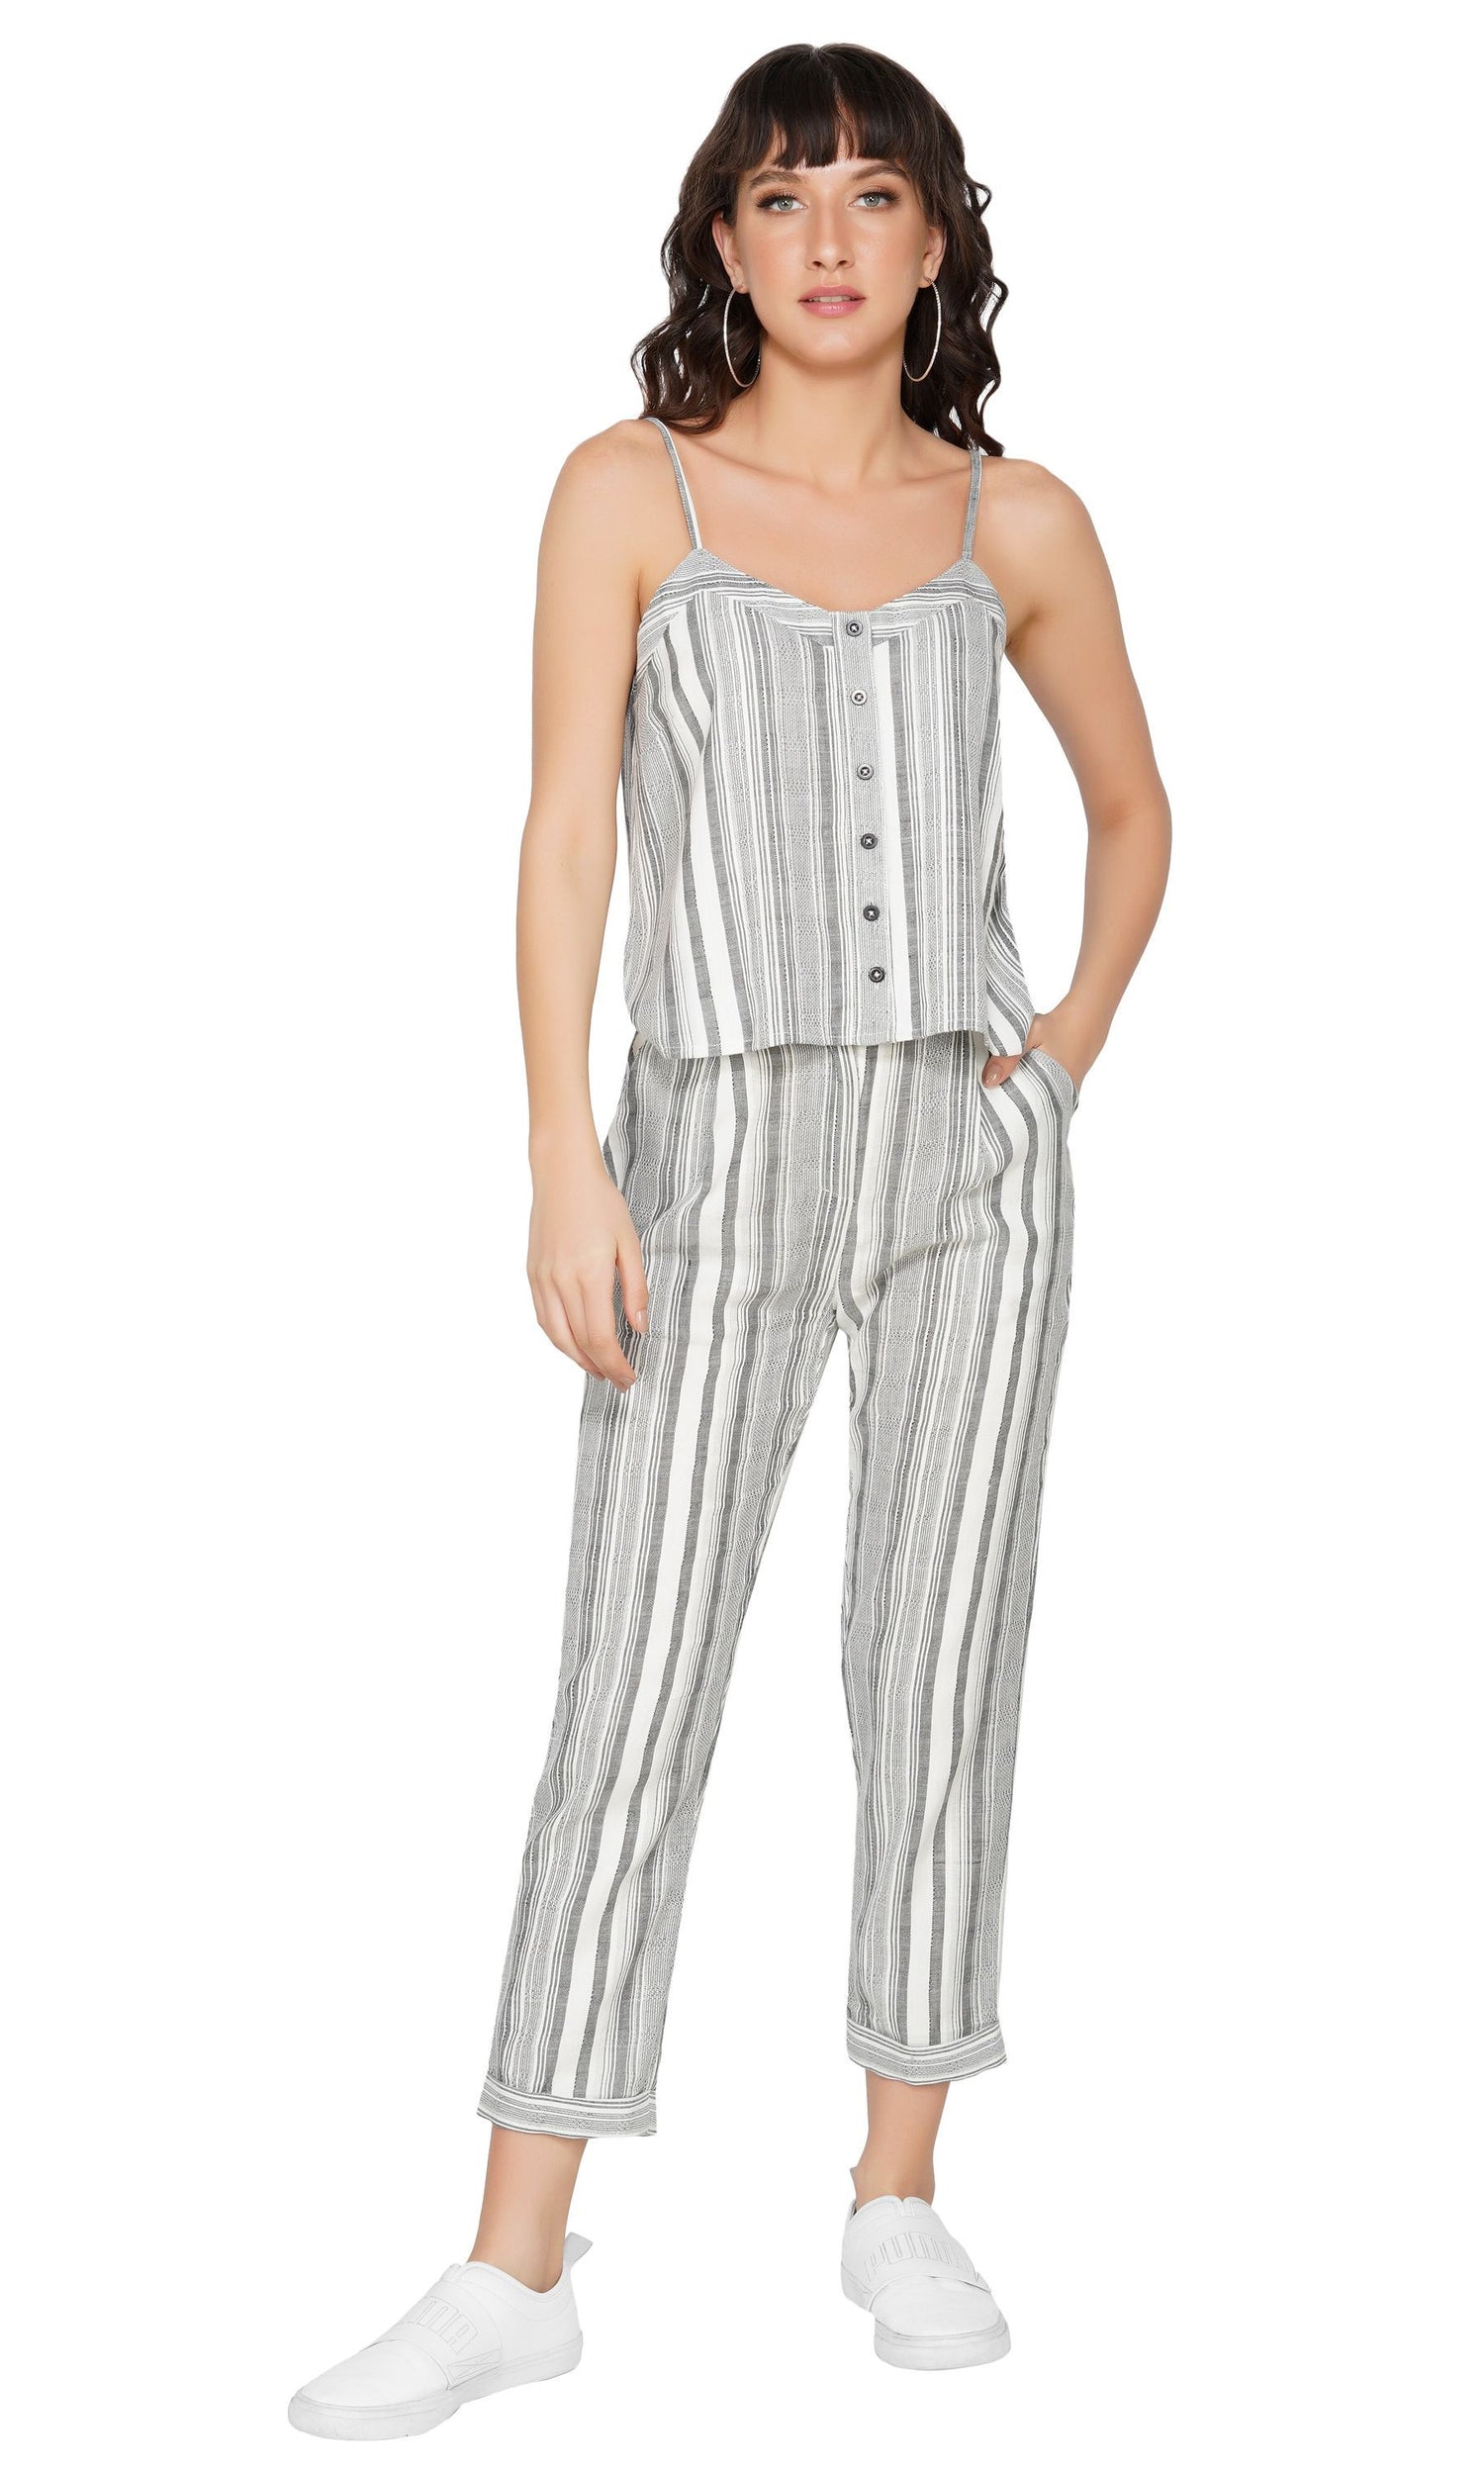 SLAY. Women's Yarn Dye Stripe Camisole And Pant Coord Set-clothing-to-slay.myshopify.com-Cami And Pant Set